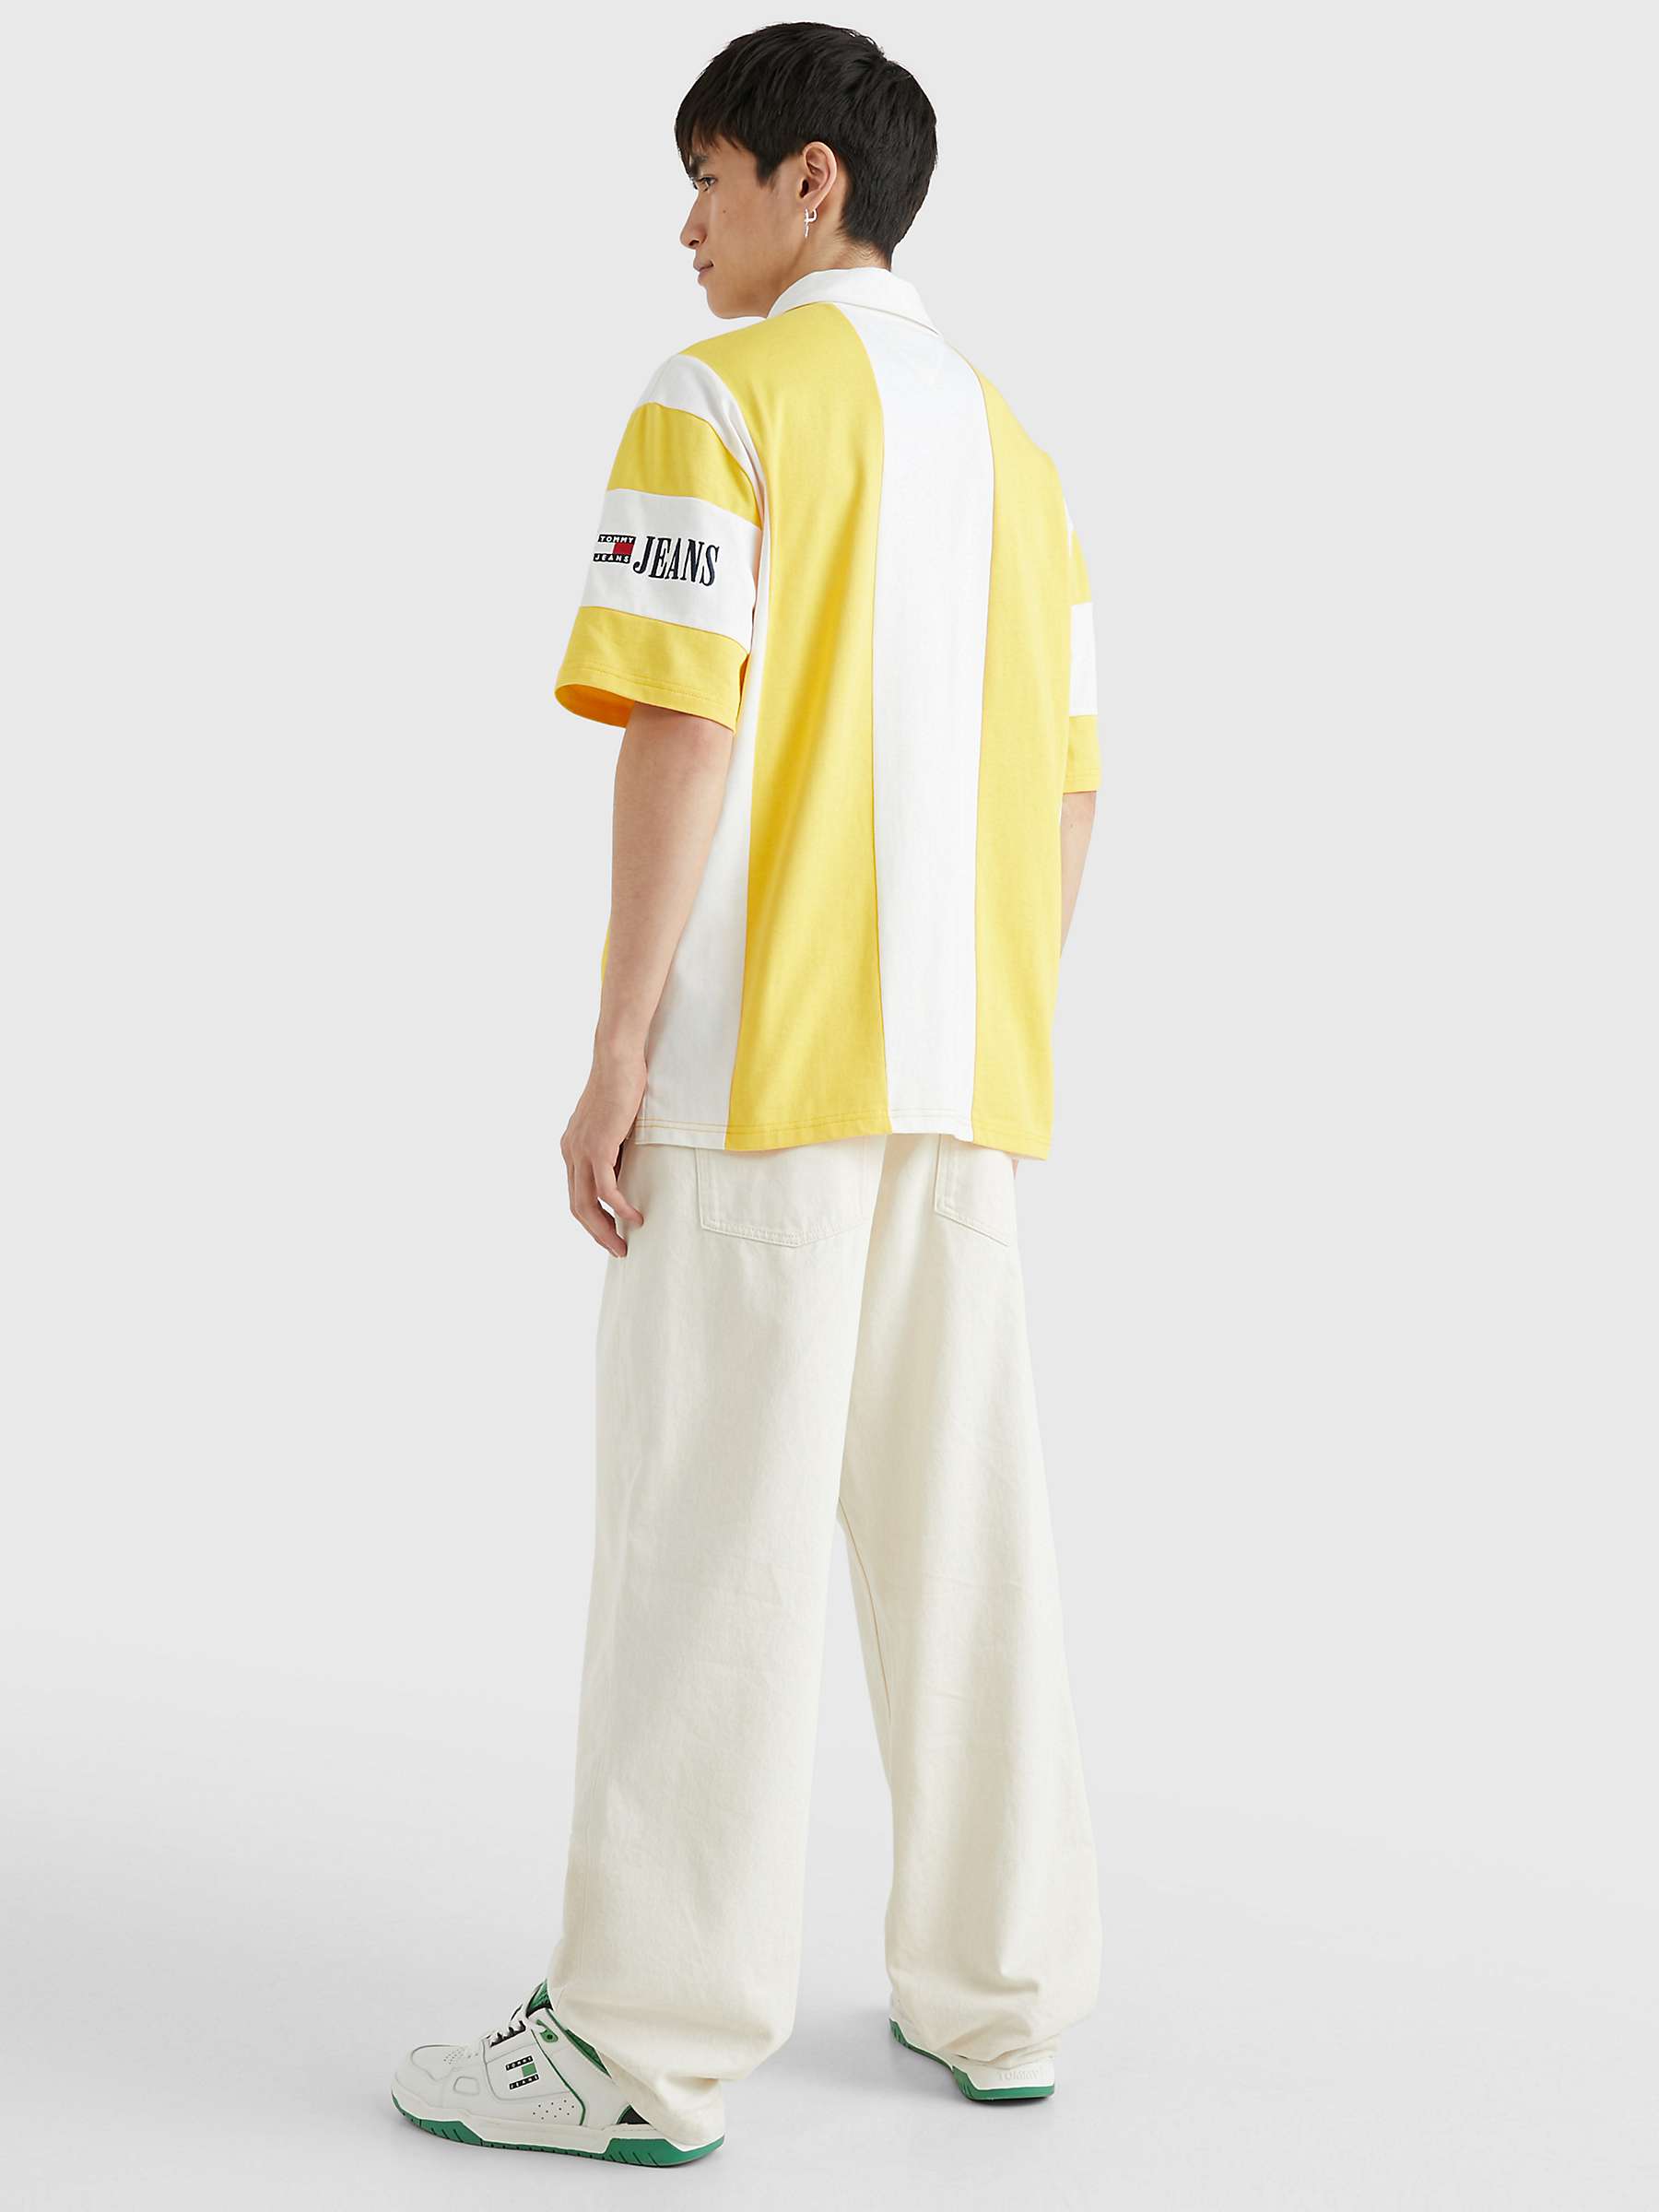 Buy Tommy Jeans Stripe Archive Short Sleeve Polo Shirt, Star Yel White Online at johnlewis.com